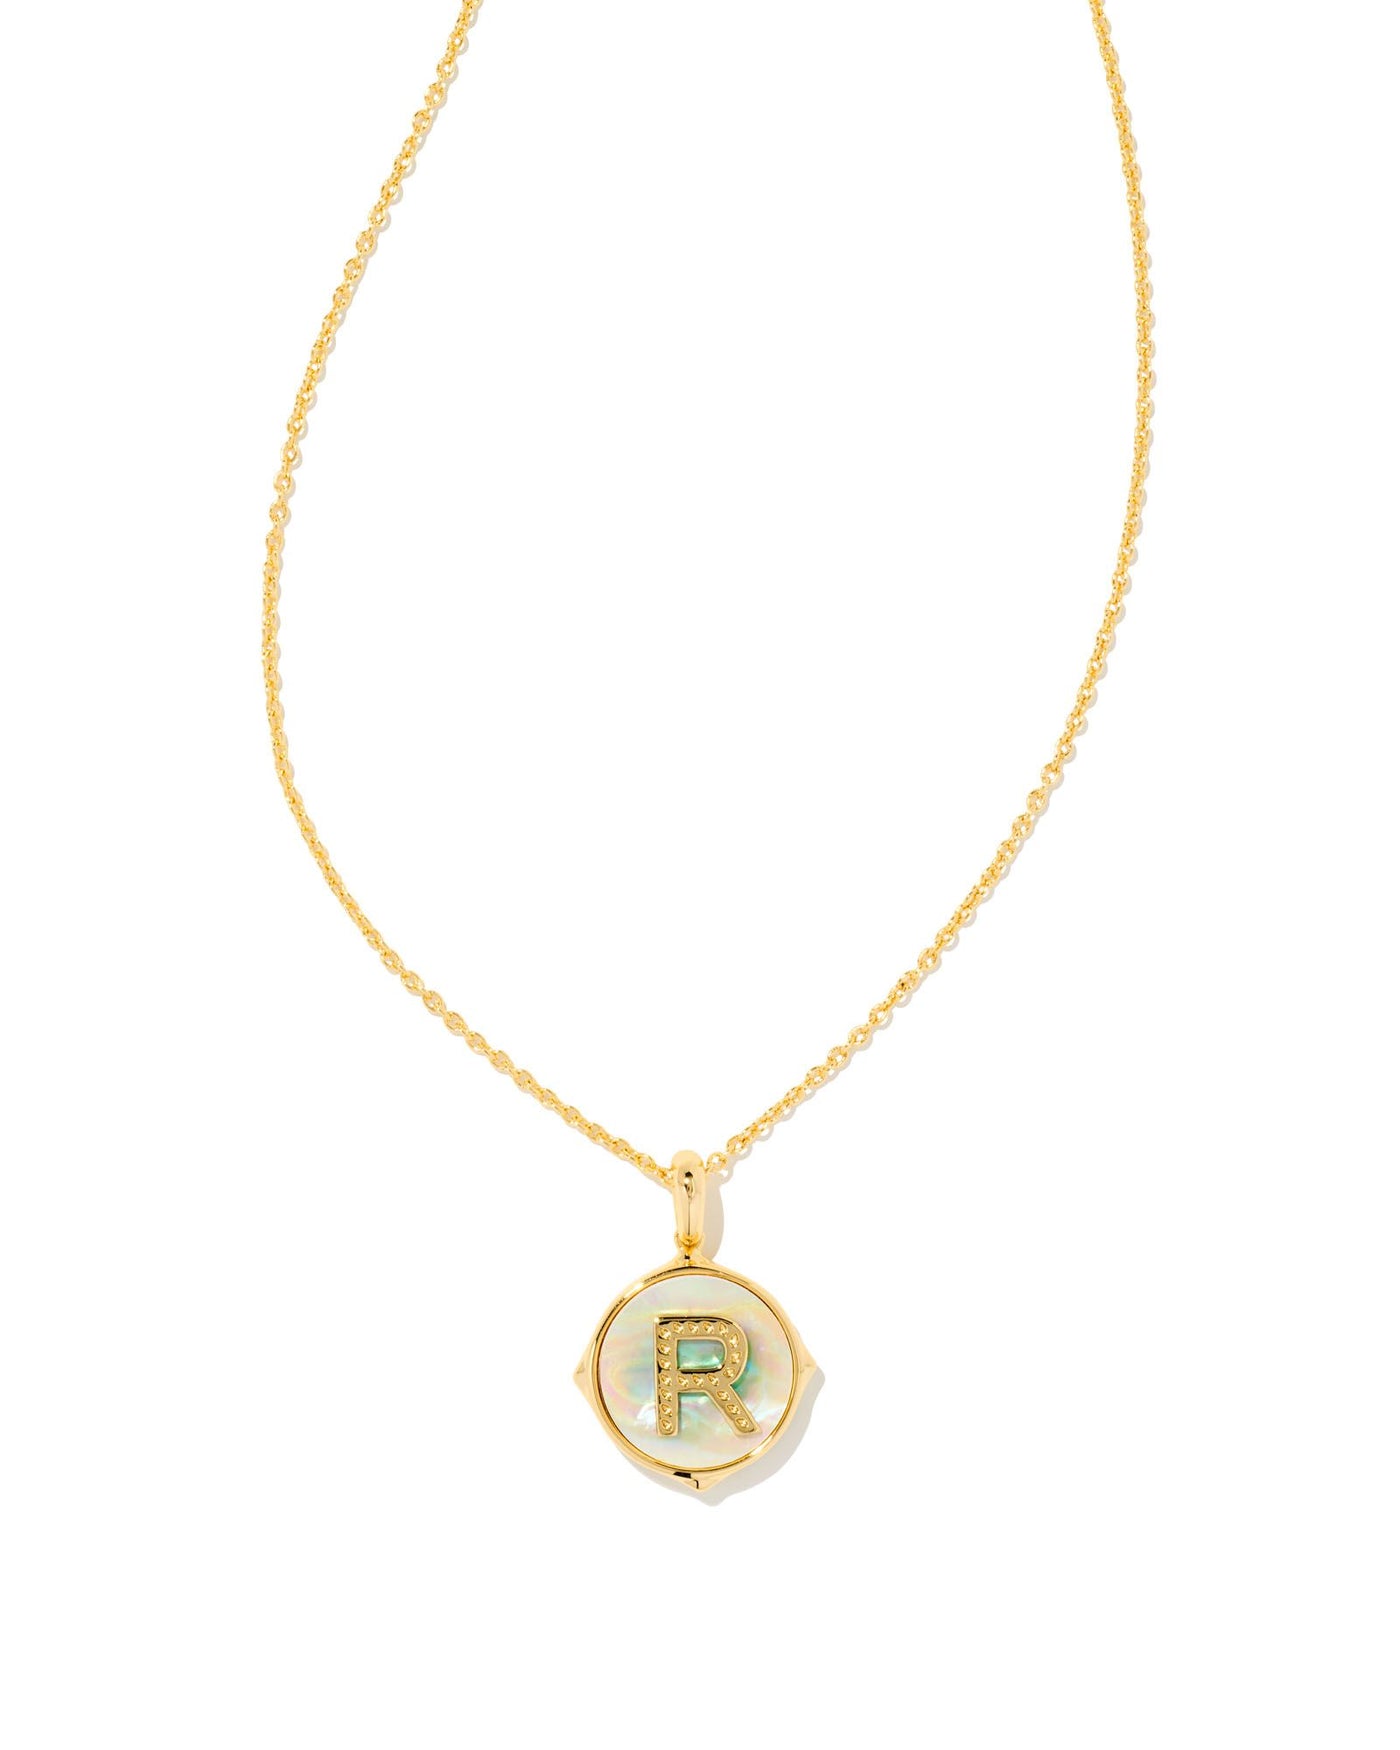 Letter R Disc Pendant Necklace Gold on white background, front view.